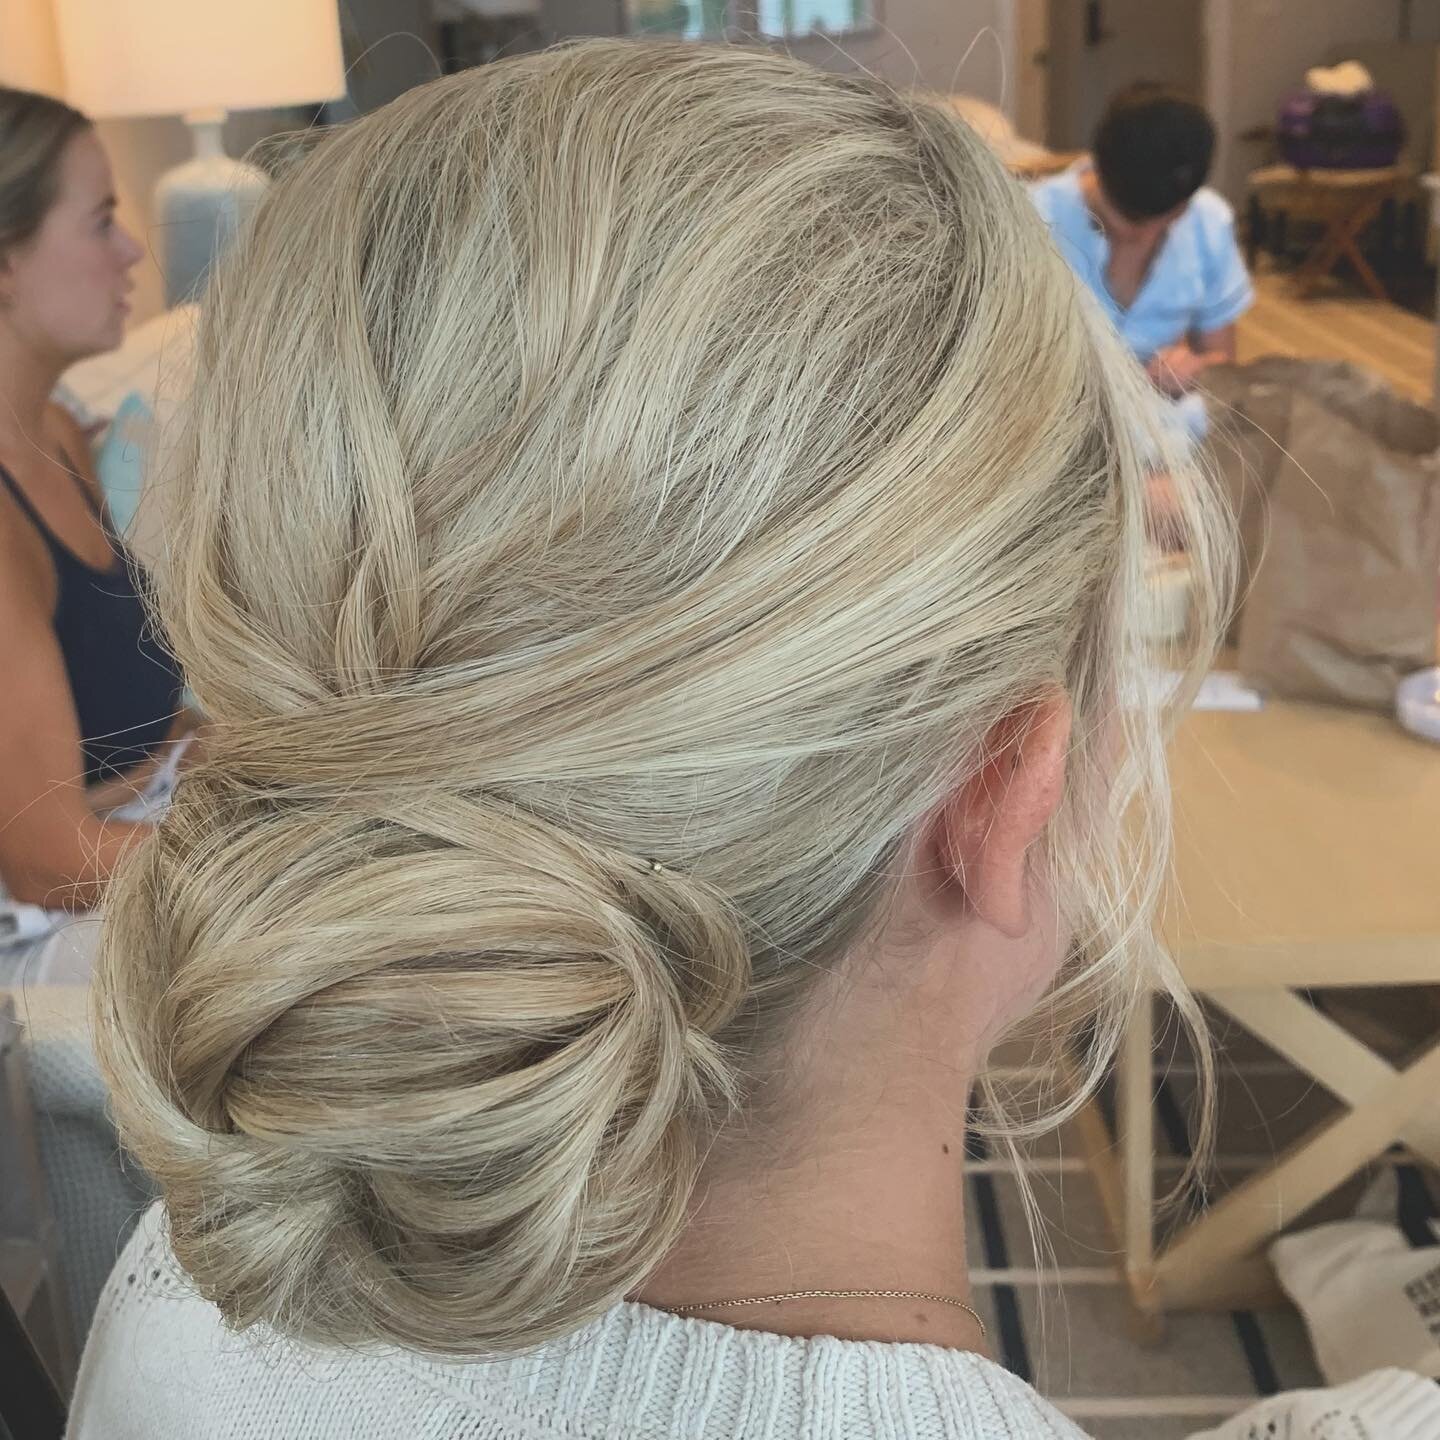 Love this classic style for bridesmaids during this crazy wedding season 😍
&bull;
&bull;
&bull;
#bostonwedding #capecodweddings #weddinghair #bostonstylist #updo